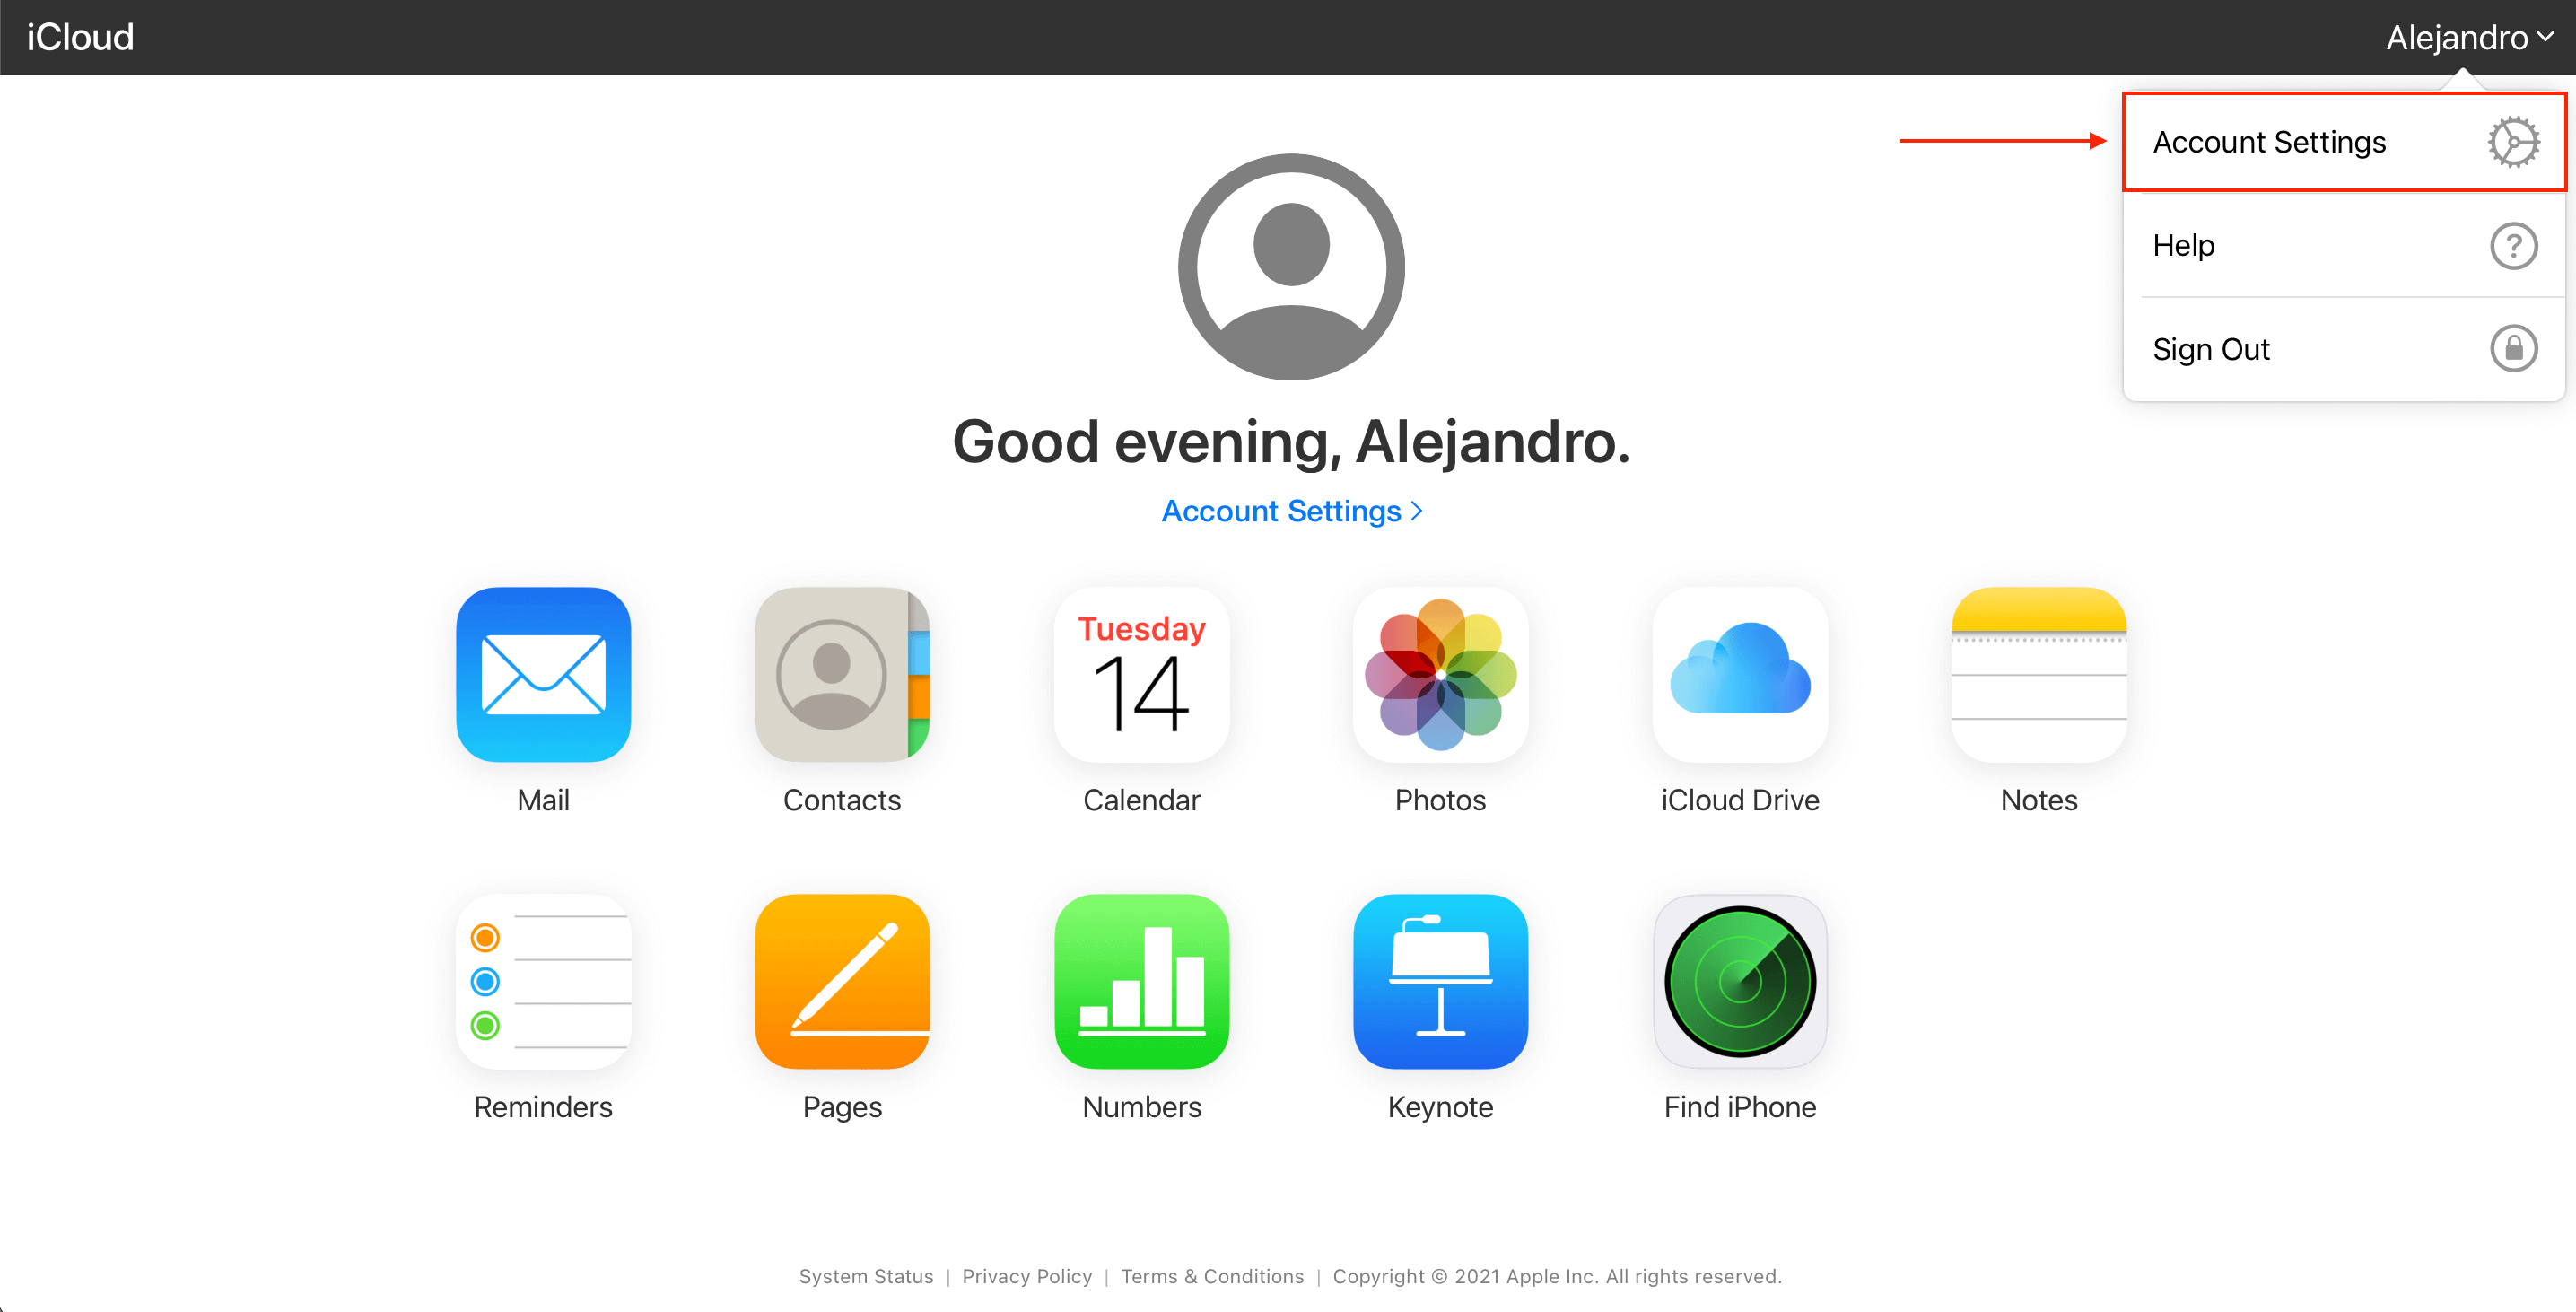 iCloud website showing a user logged into his main iCloud page, with a pointer towards account settings